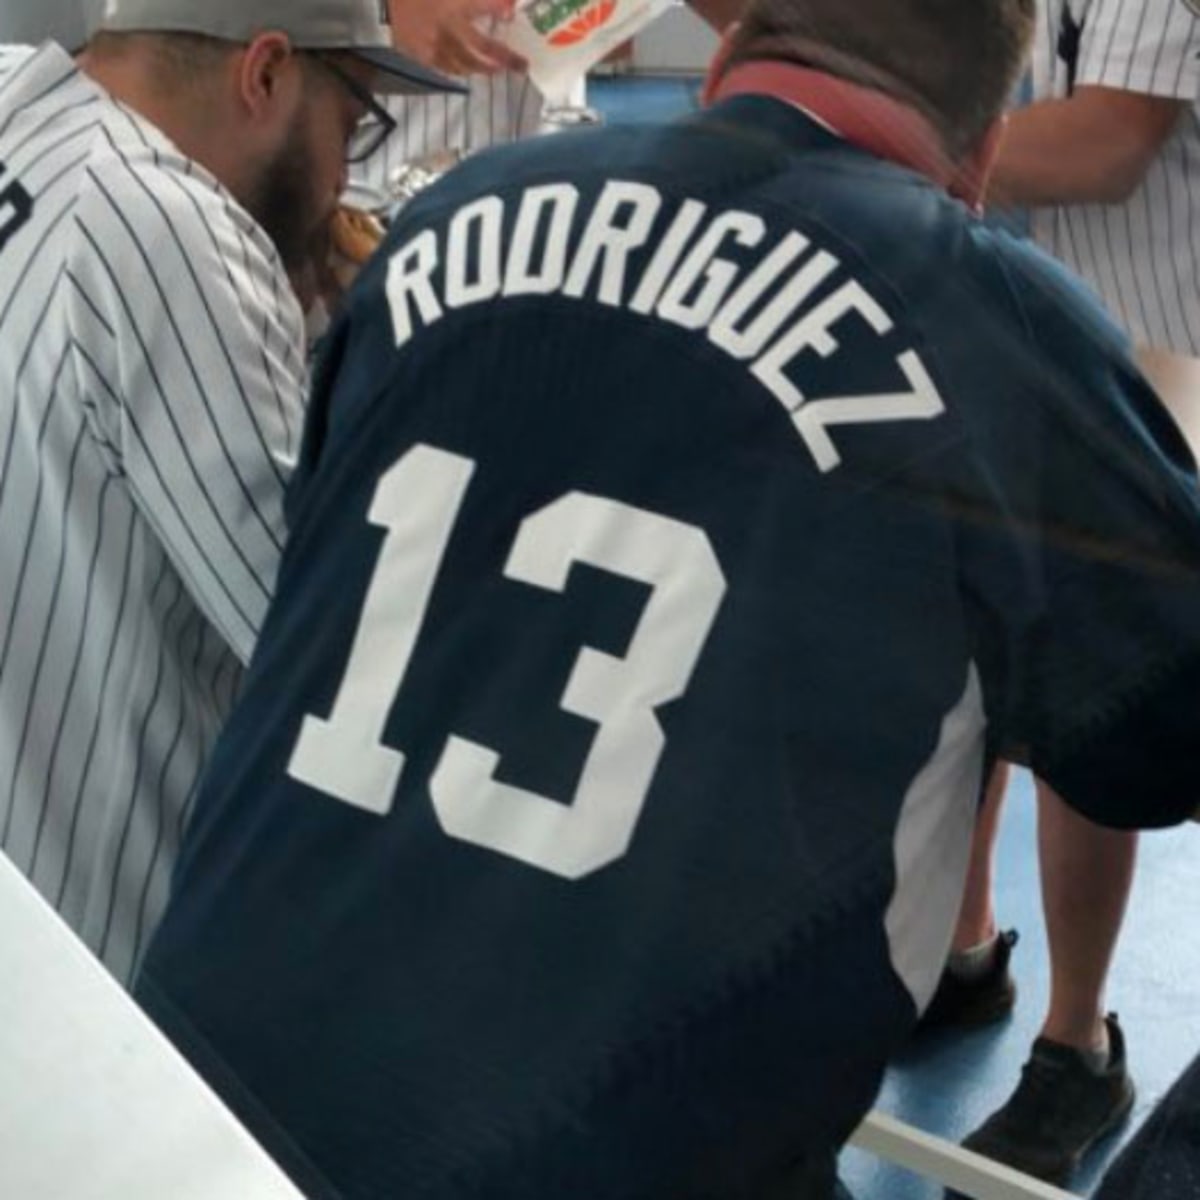 Do's and Don'ts When It Comes To Wearing Yankee Gear